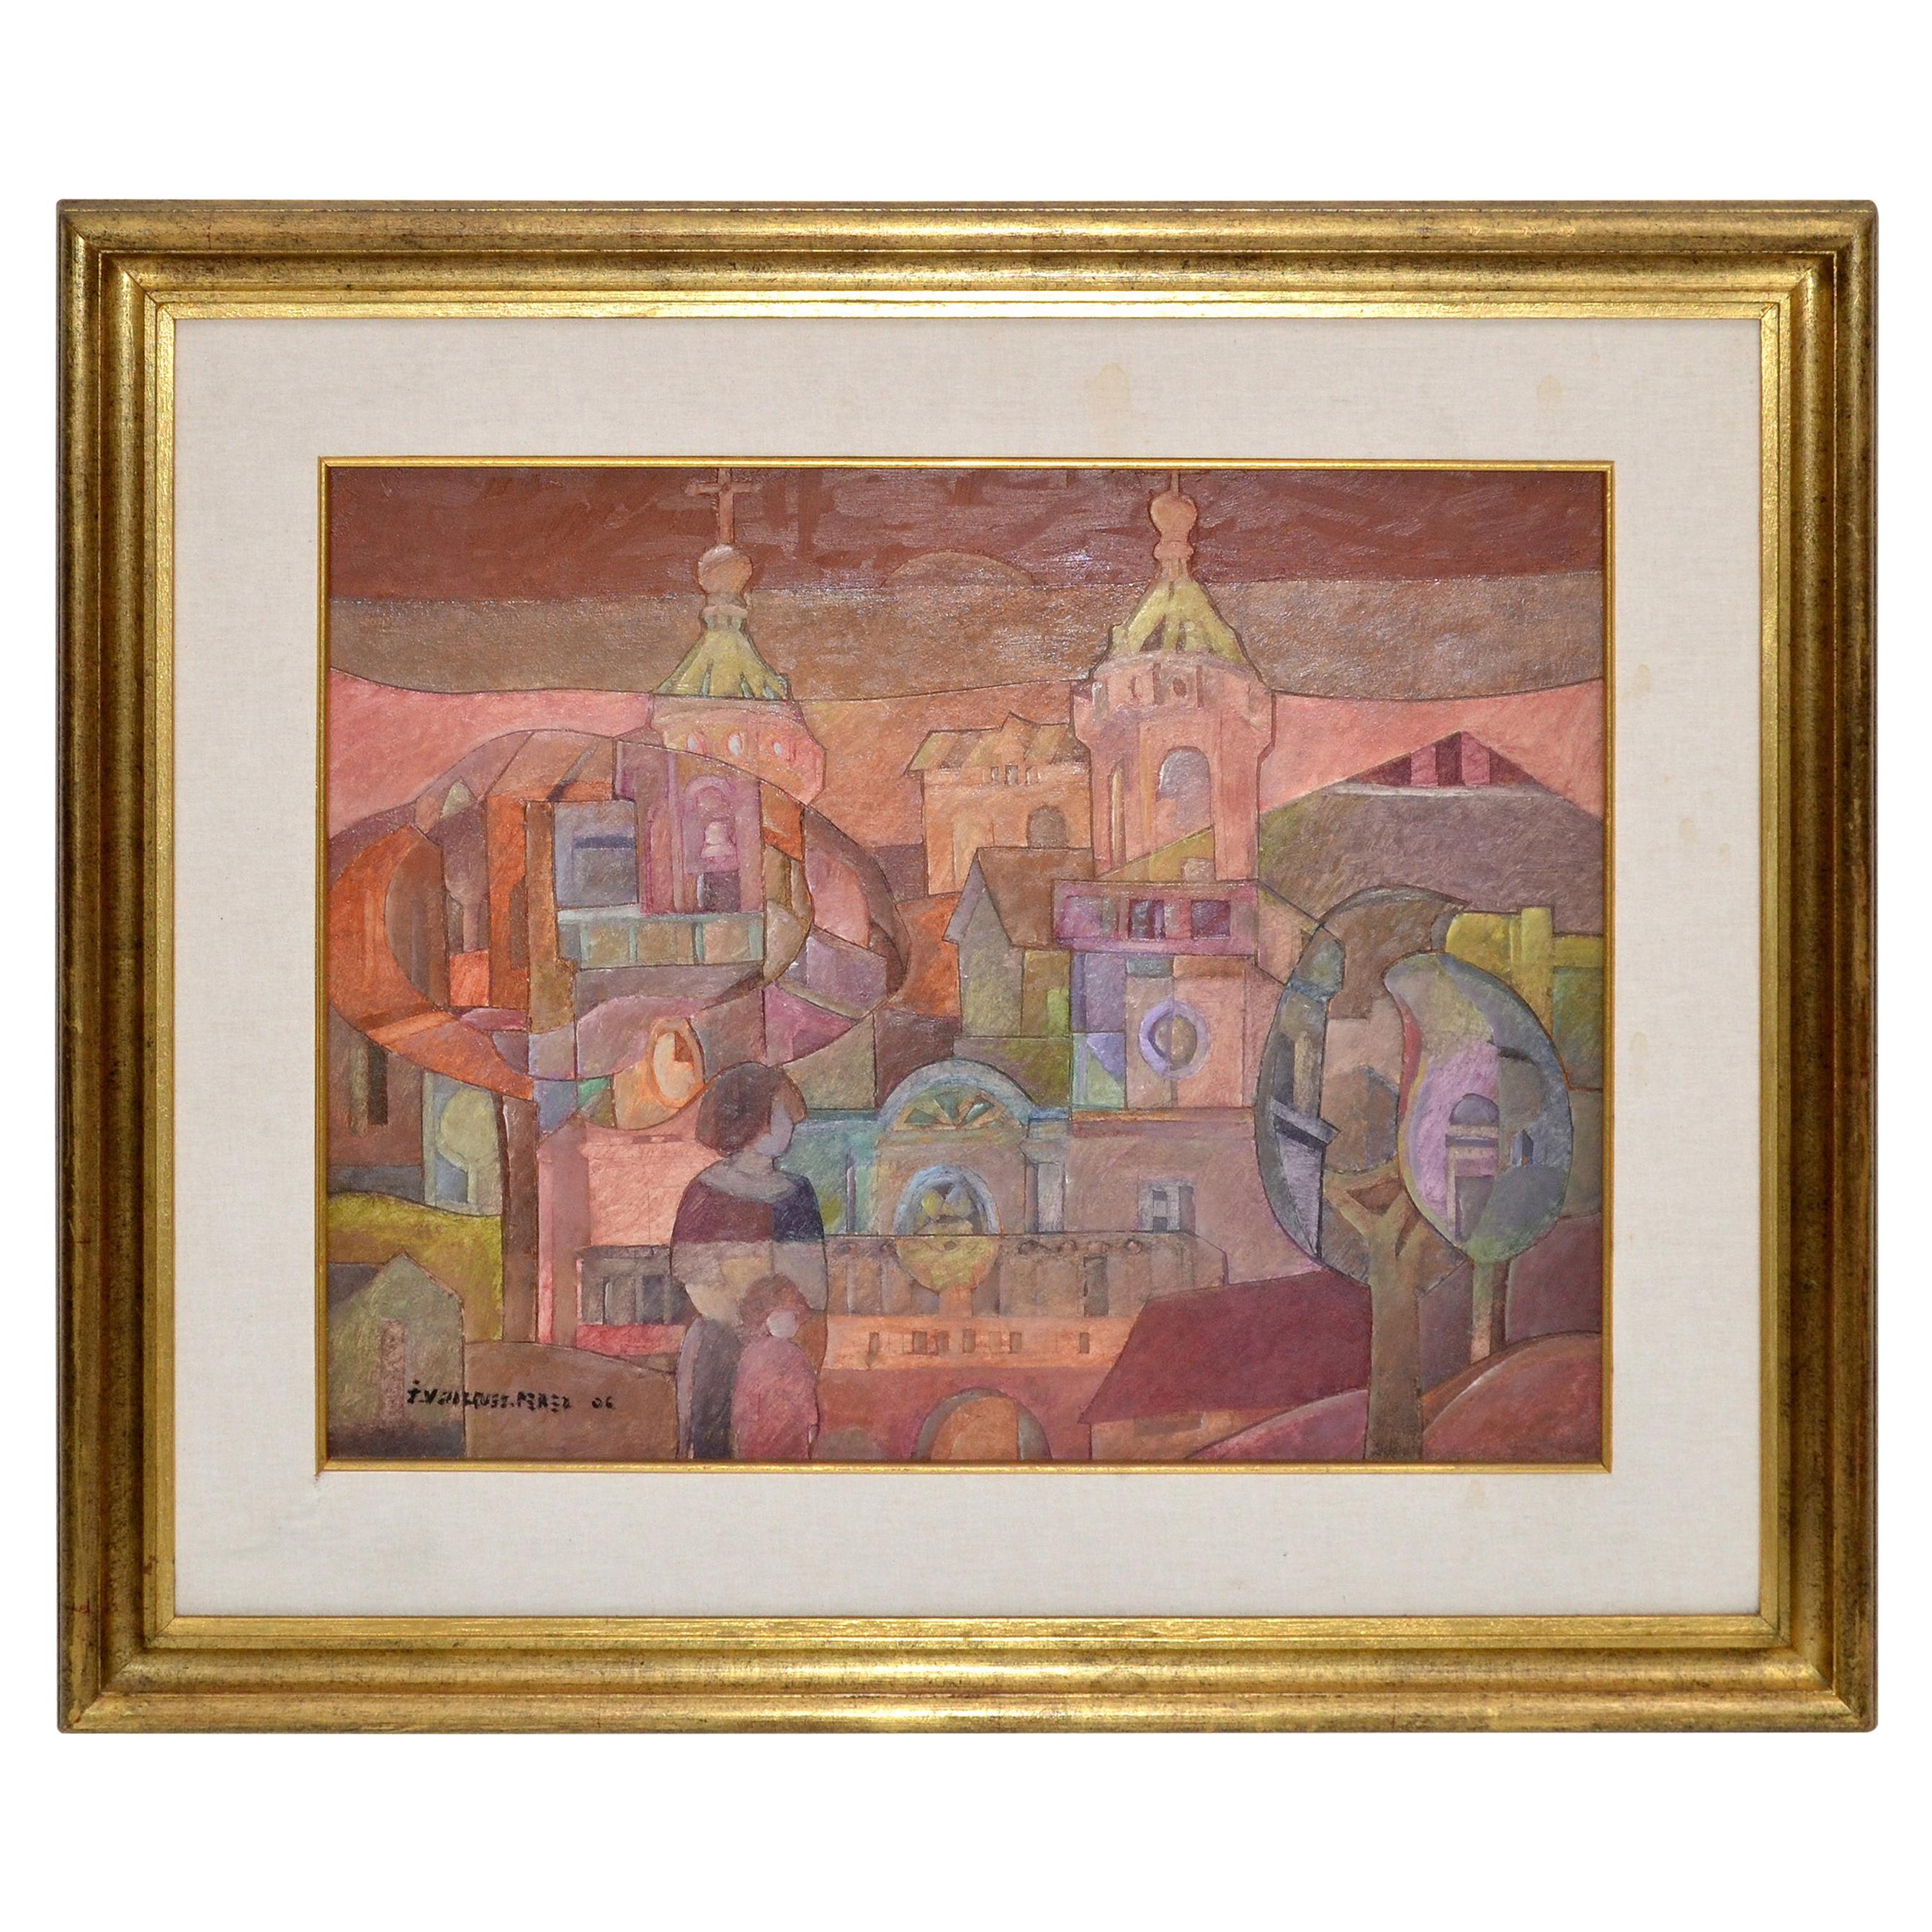 Signed Golden Framed South American Art Well-Known Uruguay Artist Painting 2006 For Sale